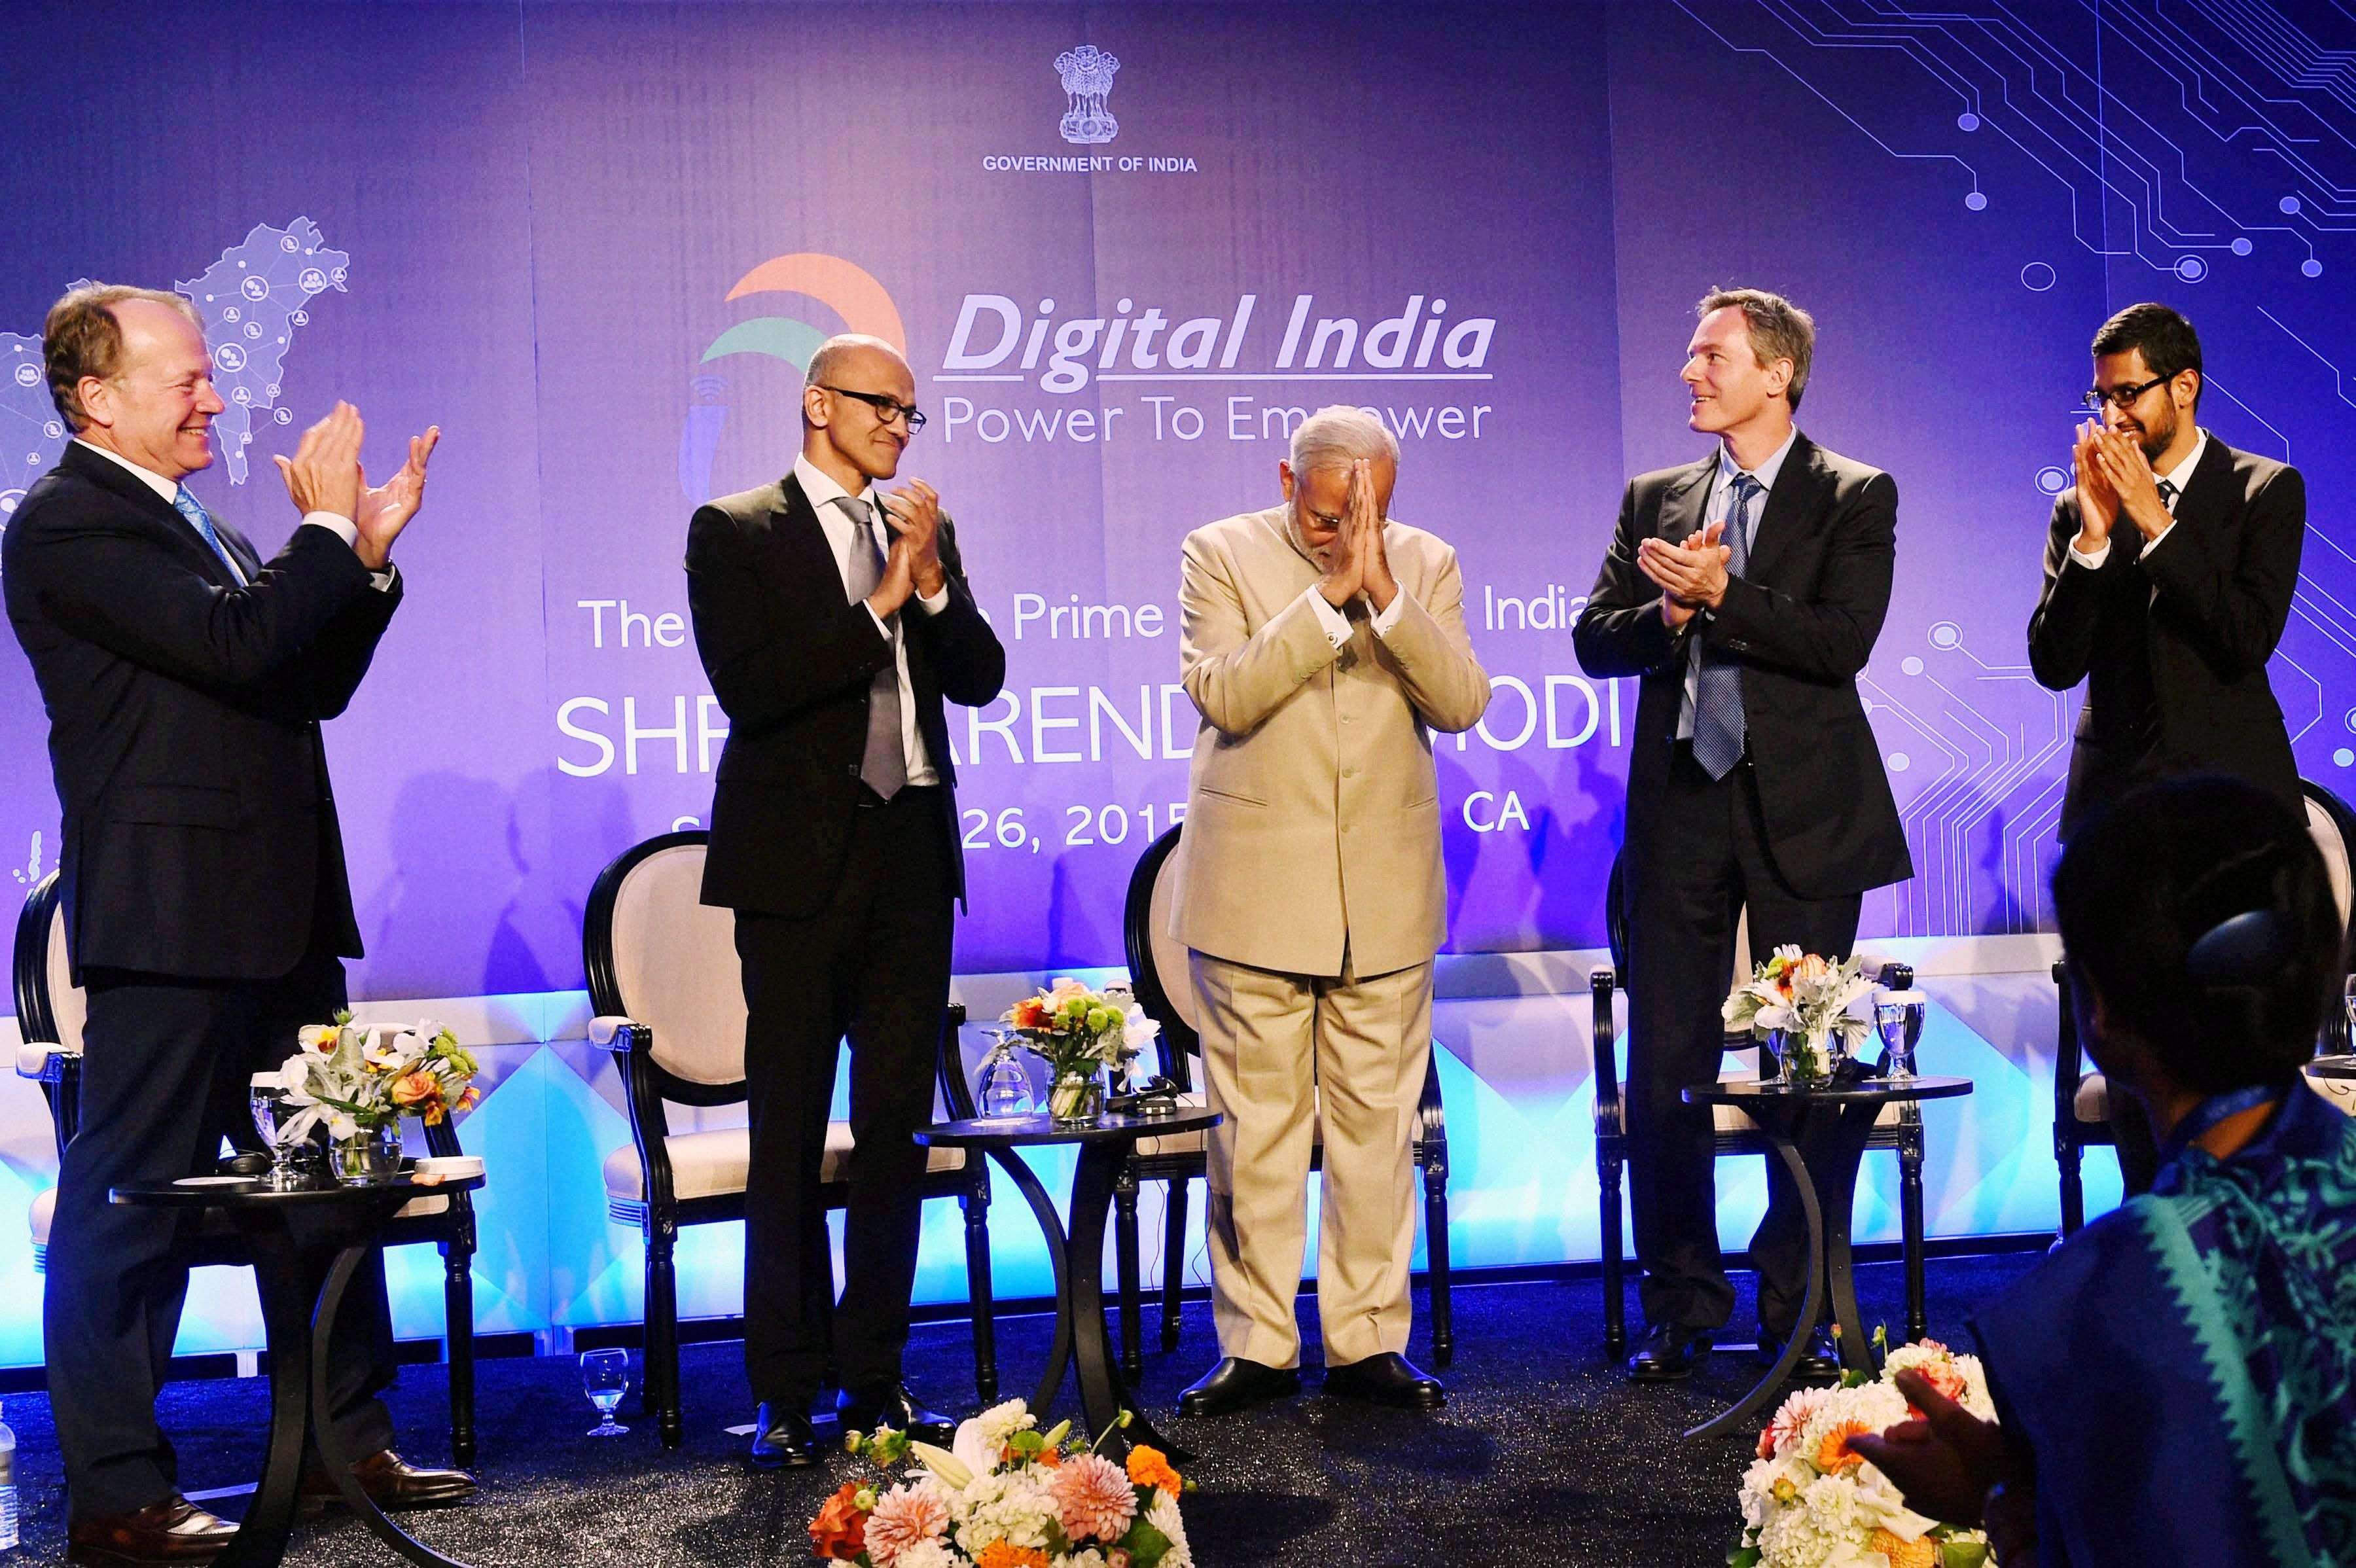 San Jose: Prime Minister Narendra Modi with Microsoft CEO Satya Nadella (2nd L), John T. Chambers, Executive Chairman of Cisco, Paul E. Jacobs, Executive Chairman of Qualcomm and Goggle CEO Sundar Pichai (R) during the Digital India and Digital Technology dinner function in San Jose on Saturday. PTI Photo by Subhav Shukla    (PTI9_27_2015_000085A)